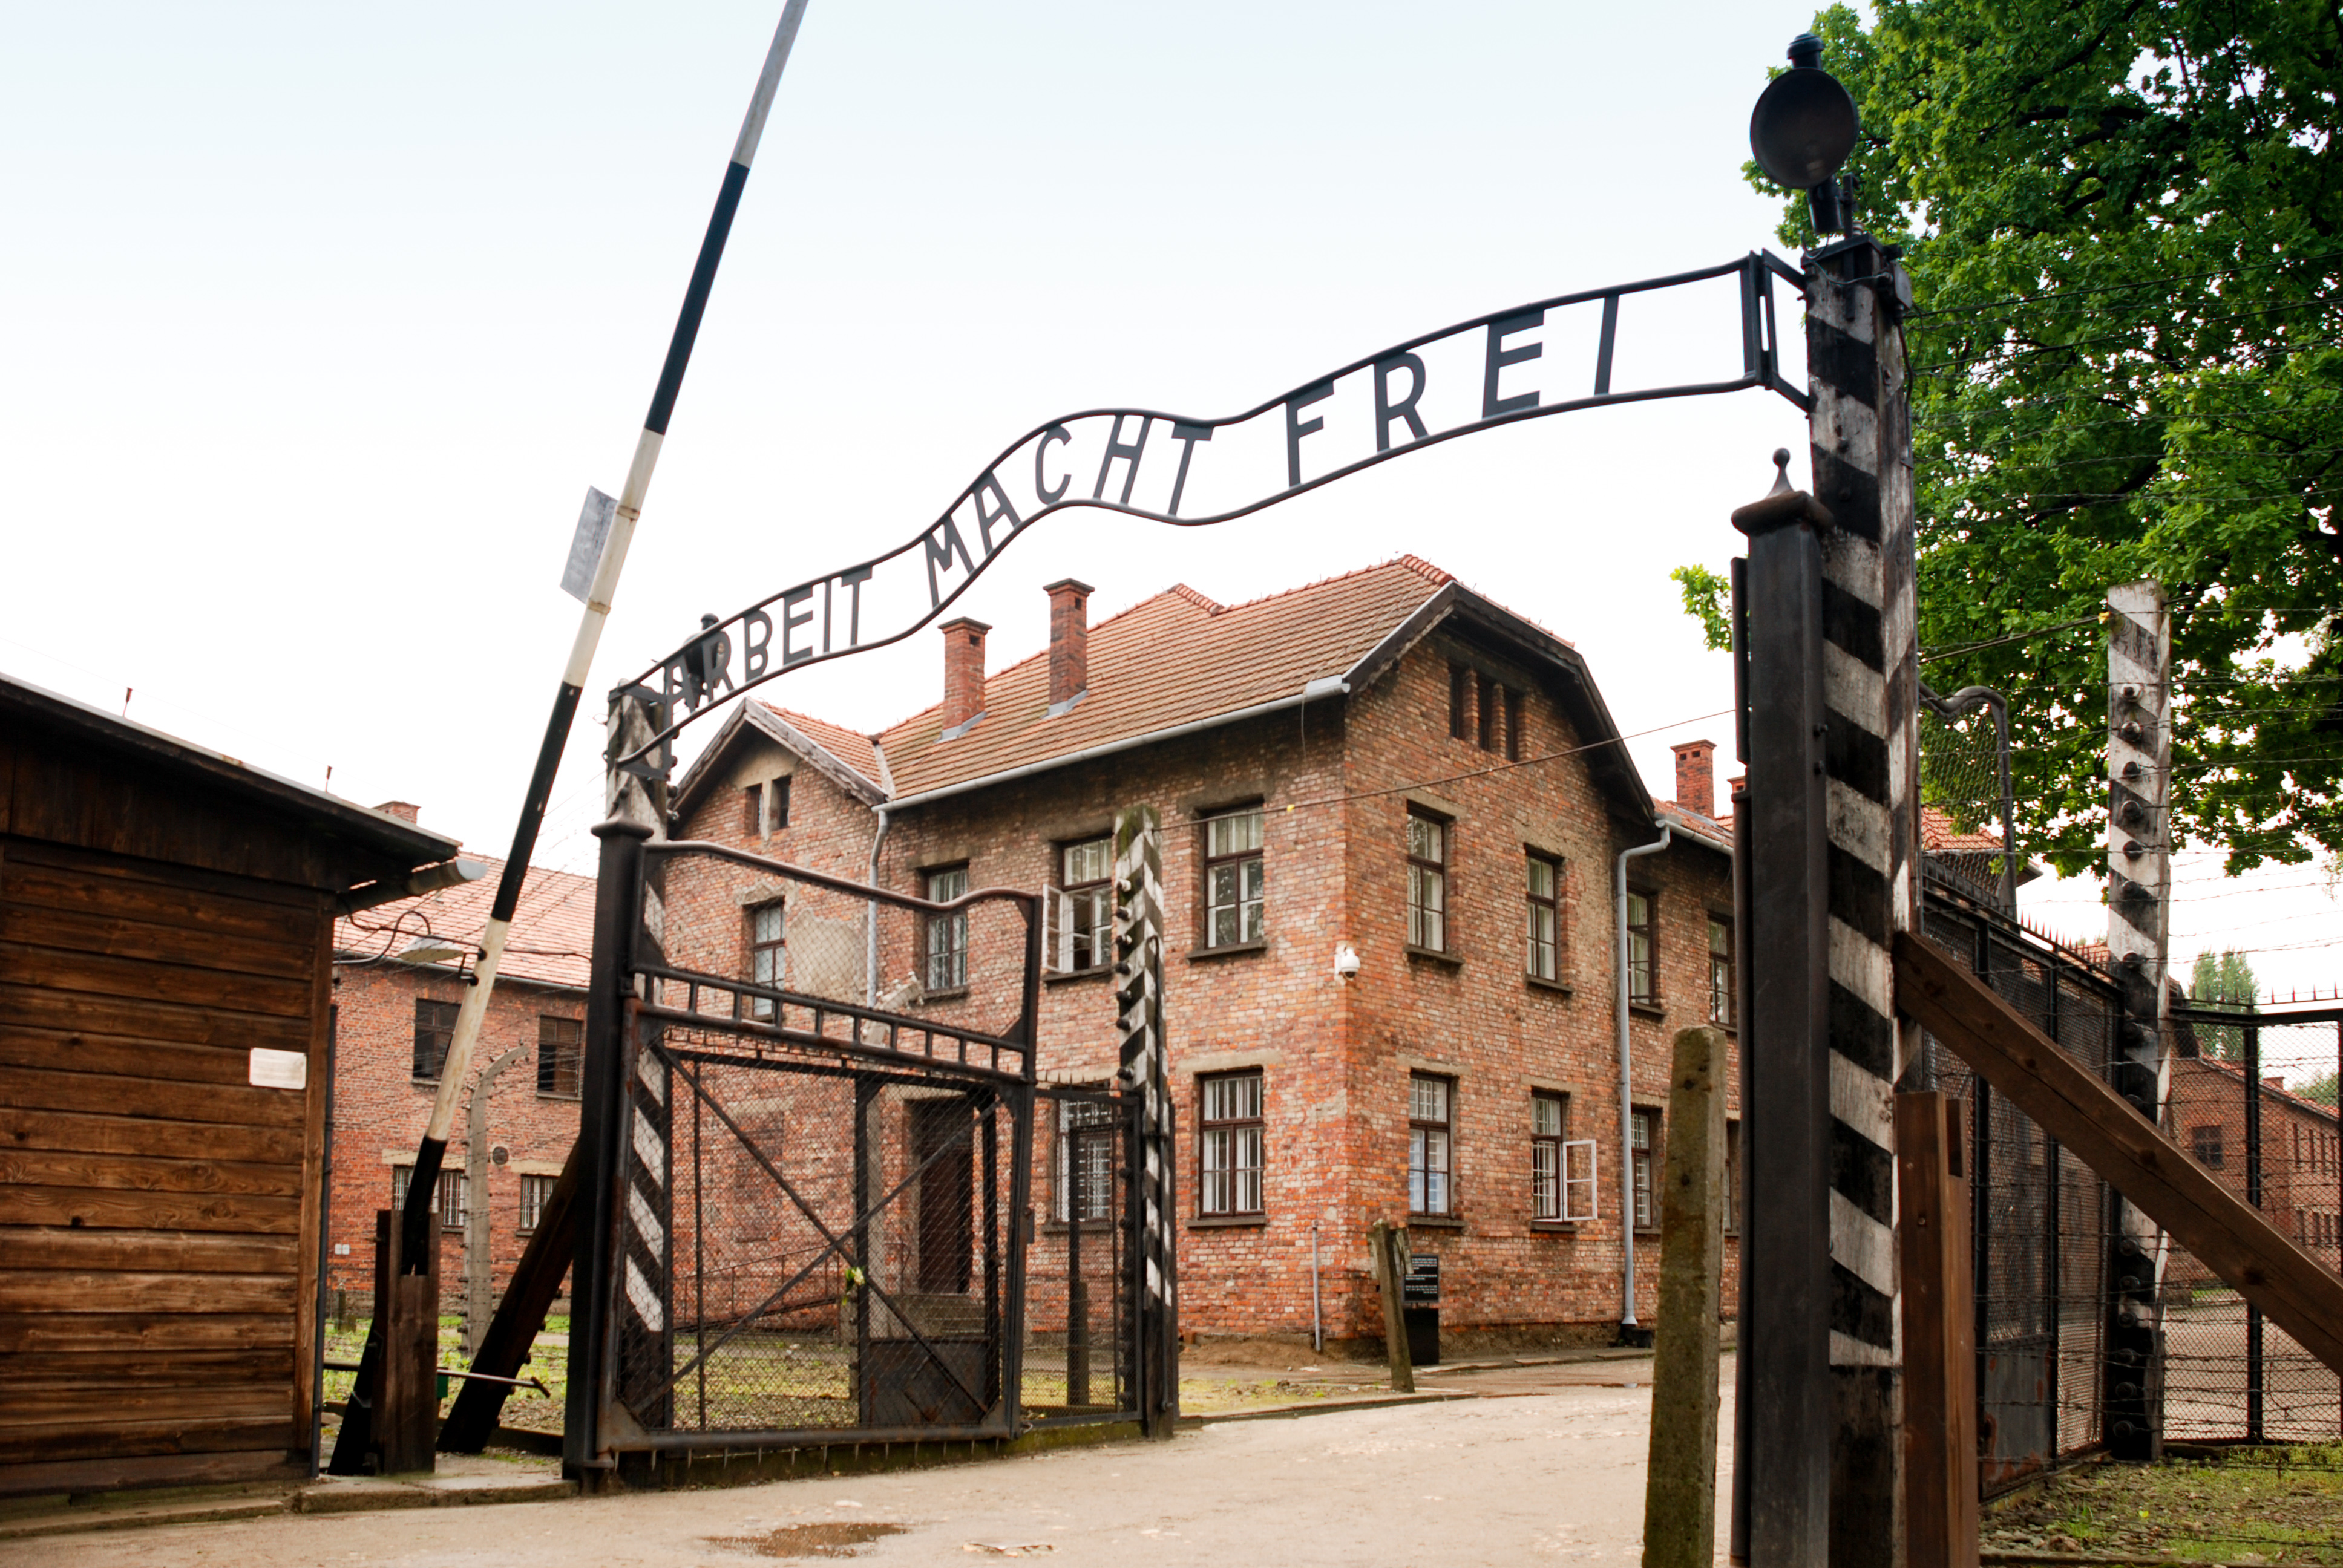 Auschwitz anniversary marked as peace again shattered by war